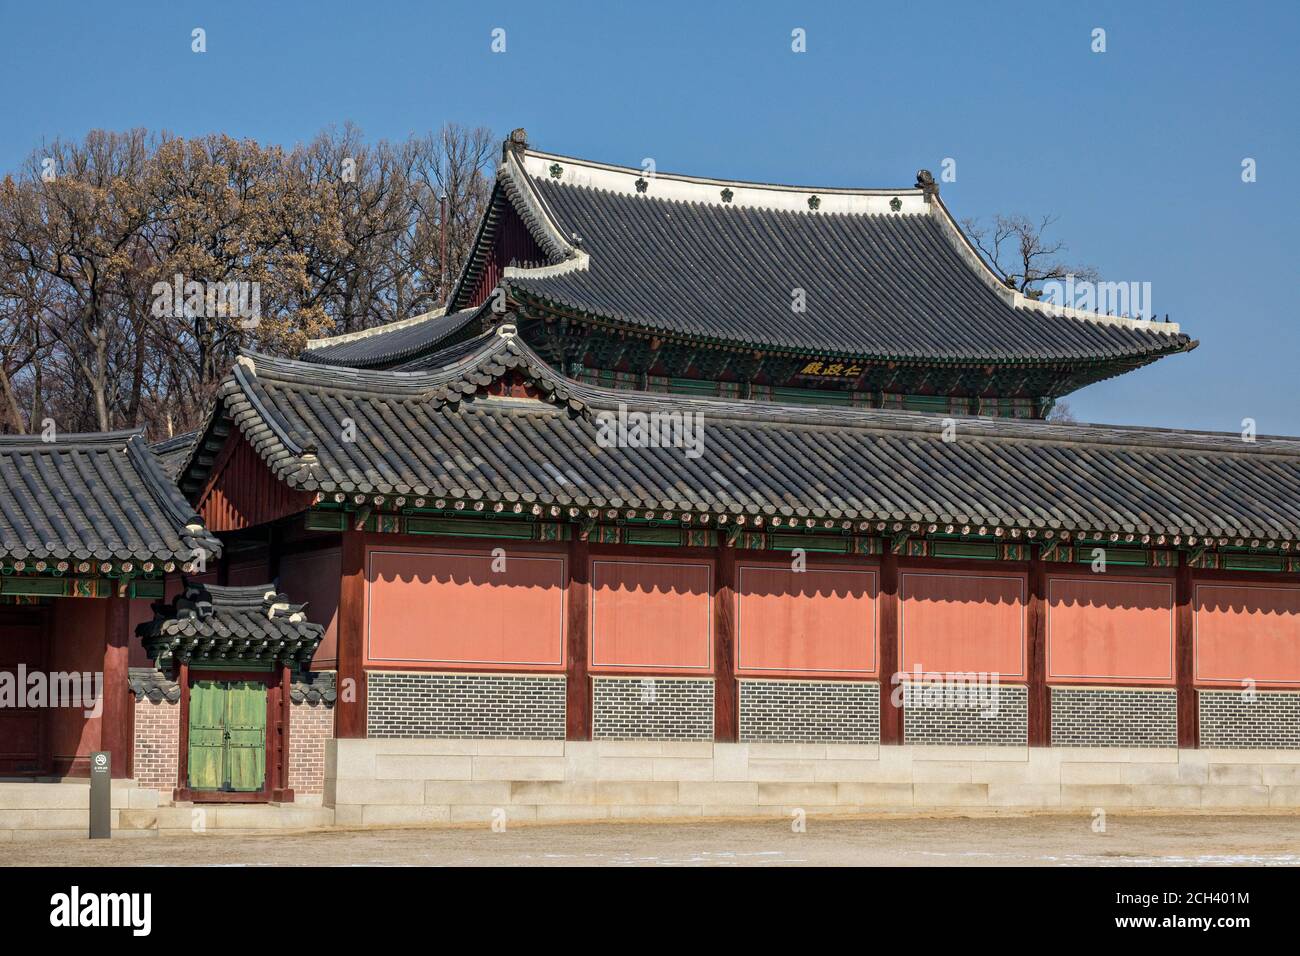 Part of the Nakseonjae Complex at the Changdeokgung Palace in Seoul, South Korea. The building was the main place for the emperor to meet with high ranking officials to discuss political, state, and foreign affairs. Stock Photo